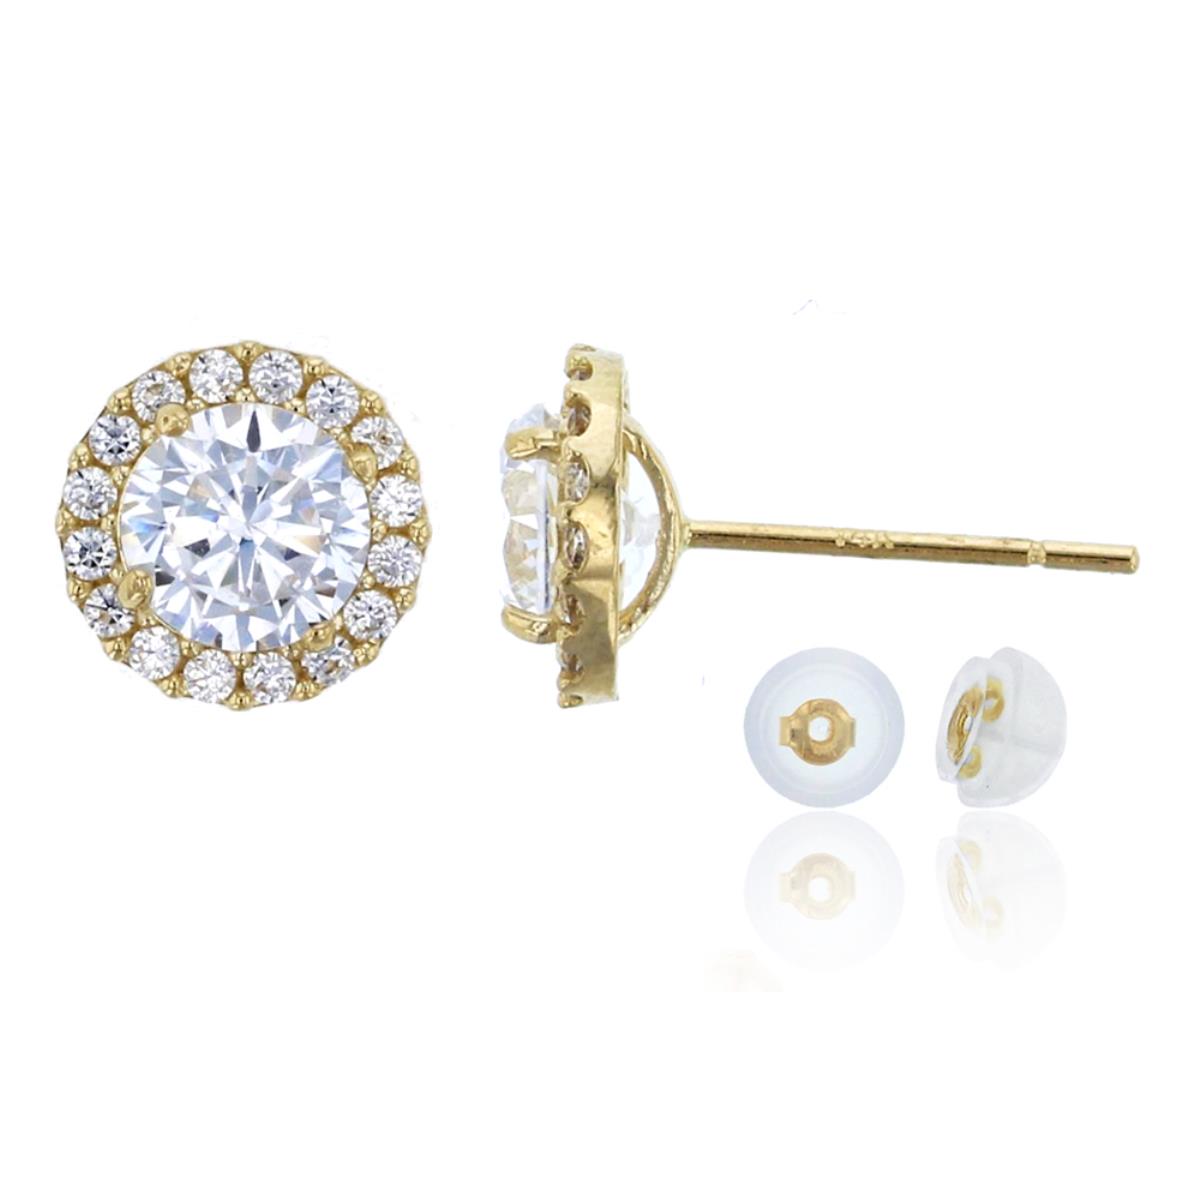 10K Yellow Gold Pave 5mm Round Cut Halo Stud & 10K Silicone Back